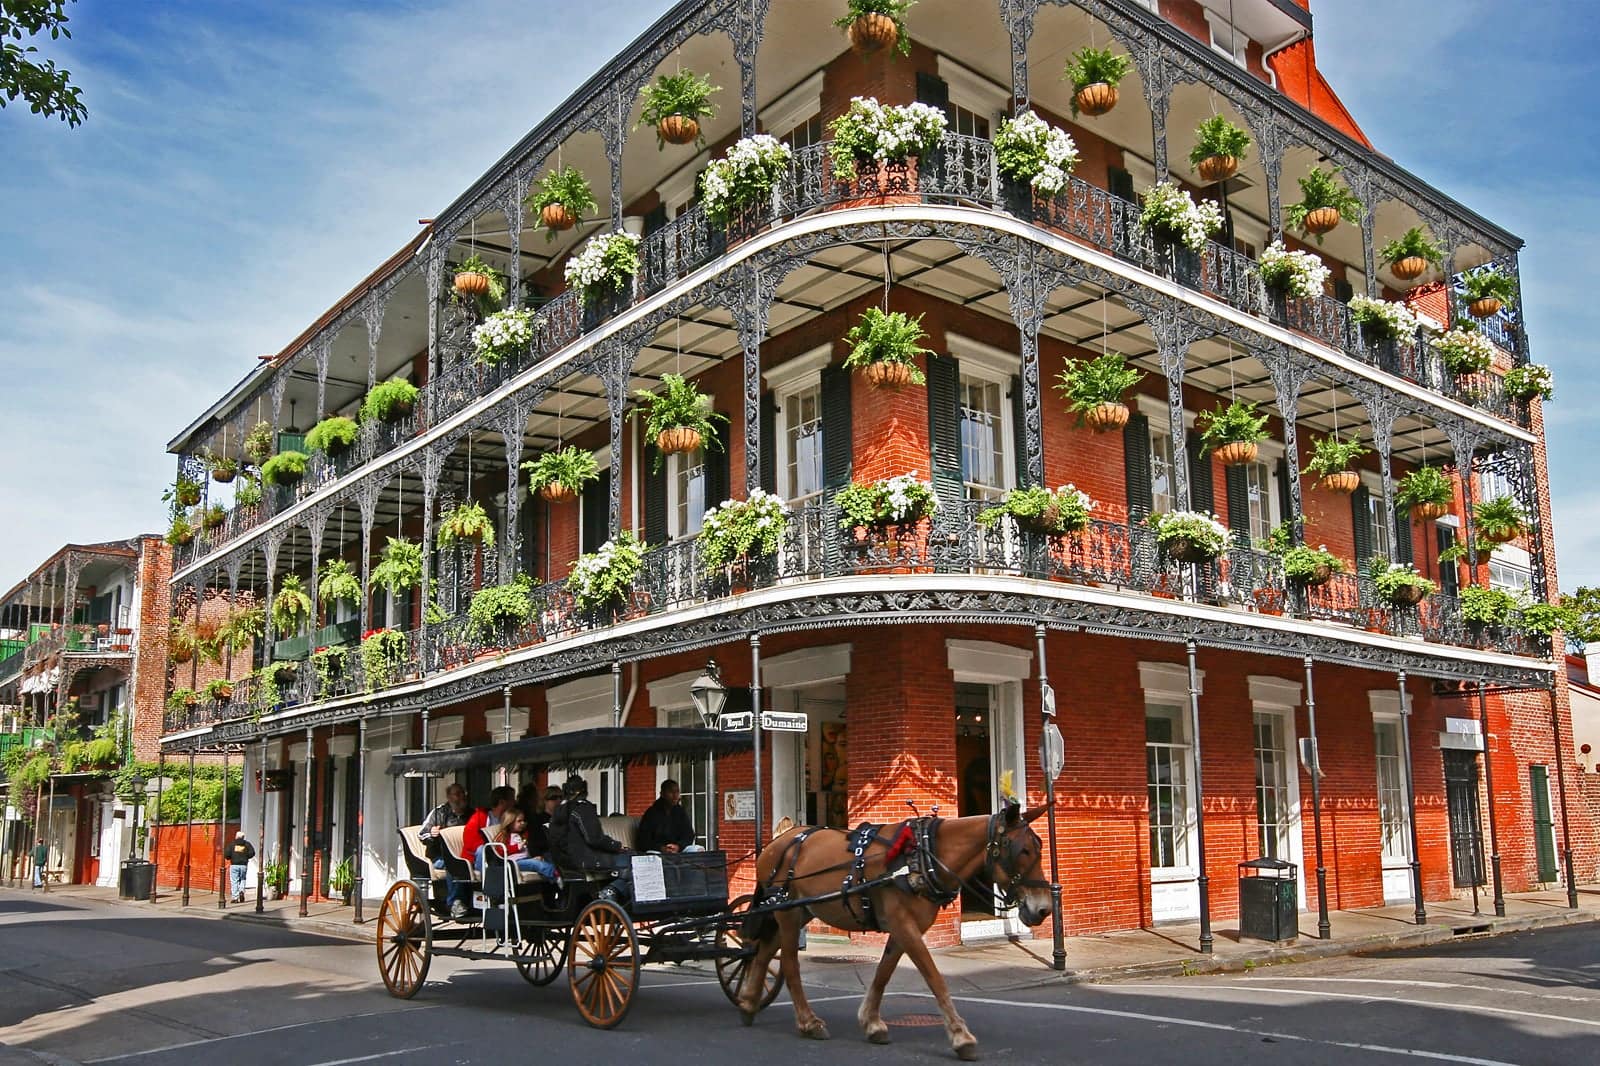 The French Quarter - New Orleans, Louisiana